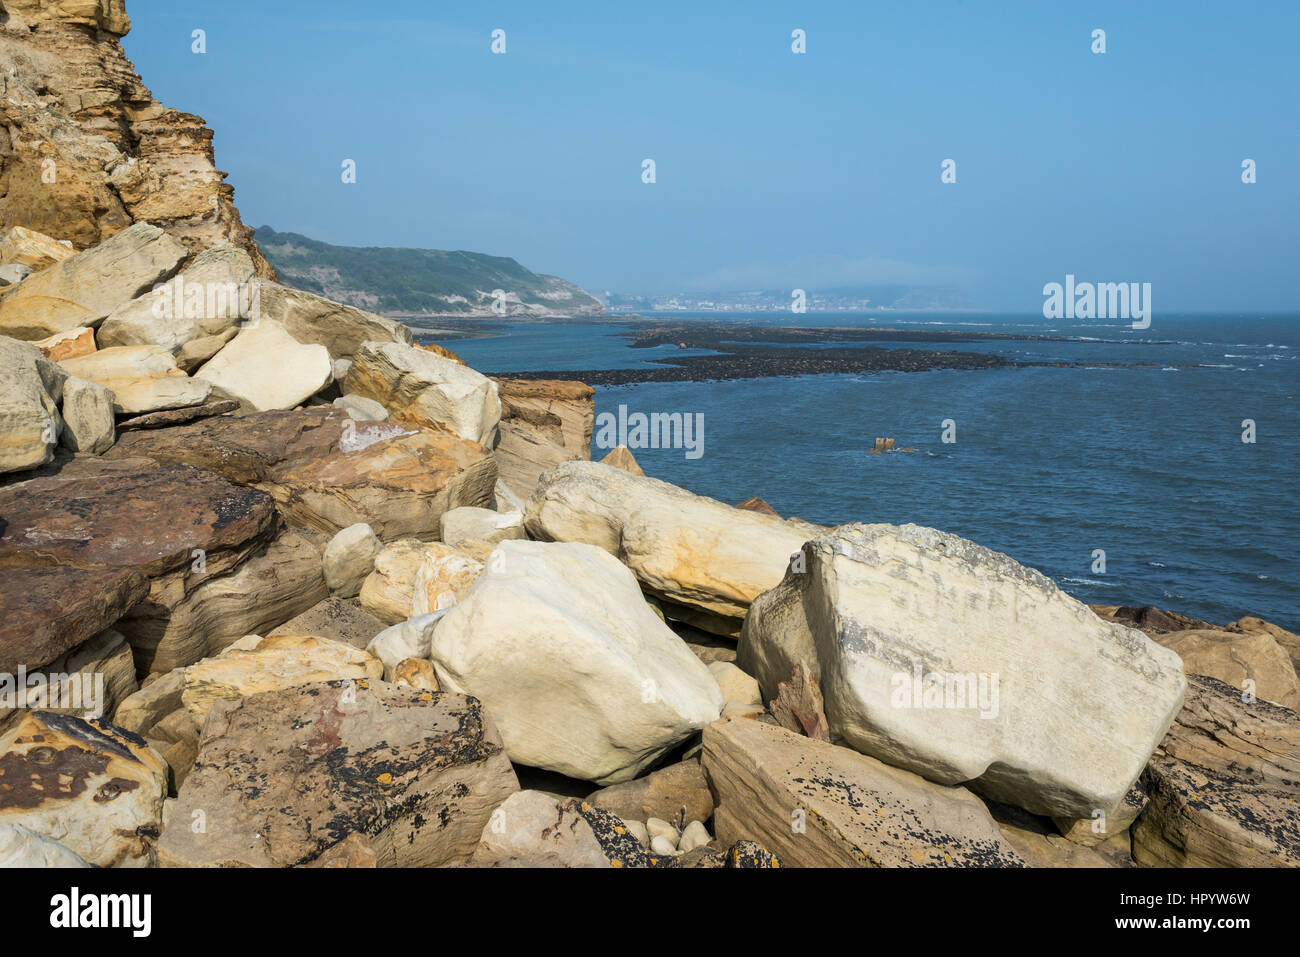 View from Knipe point (Osgodby point) near Scarborough on the coast of North Yorkshire, England. A beautiful sunny day on the rocky headland. Stock Photo